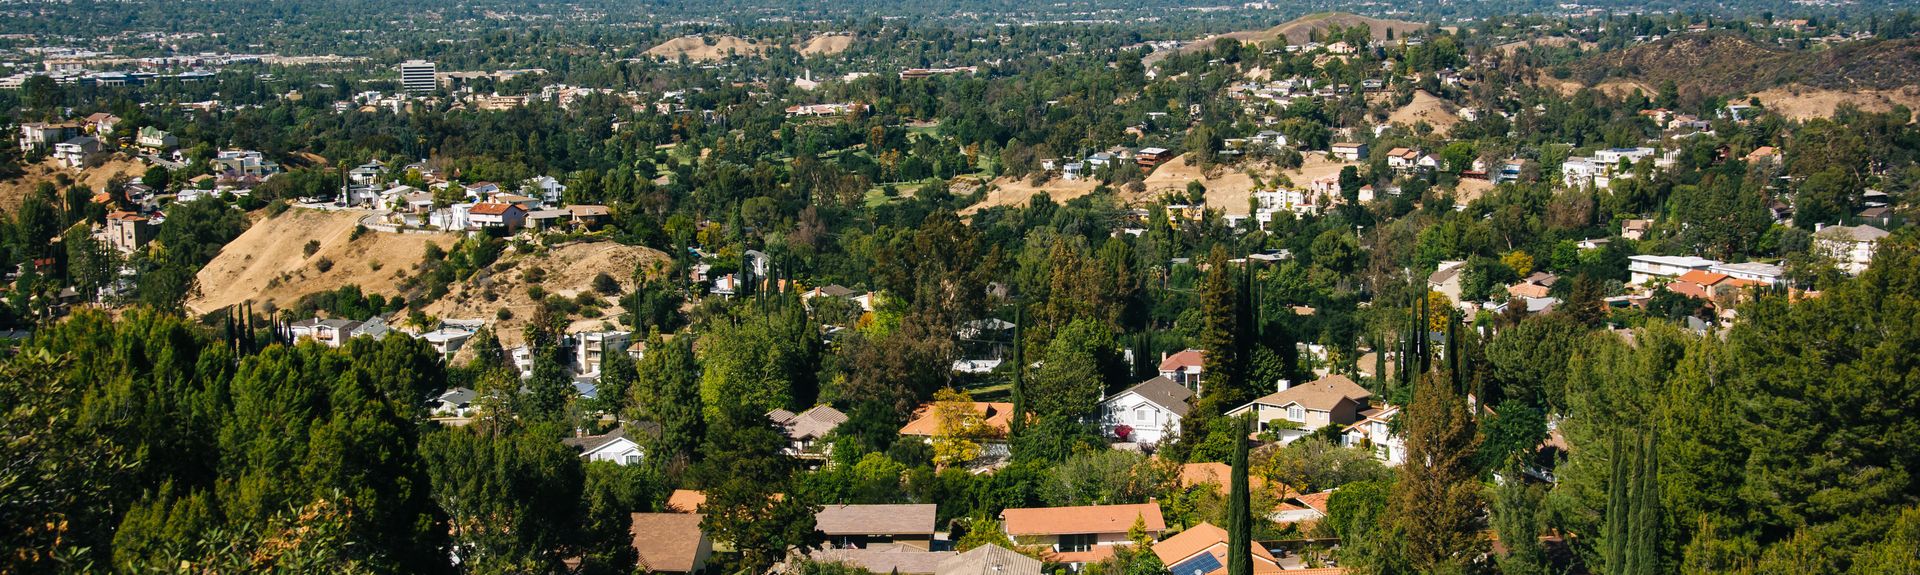 San Fernando Valley Us Holiday Accommodation Houses More